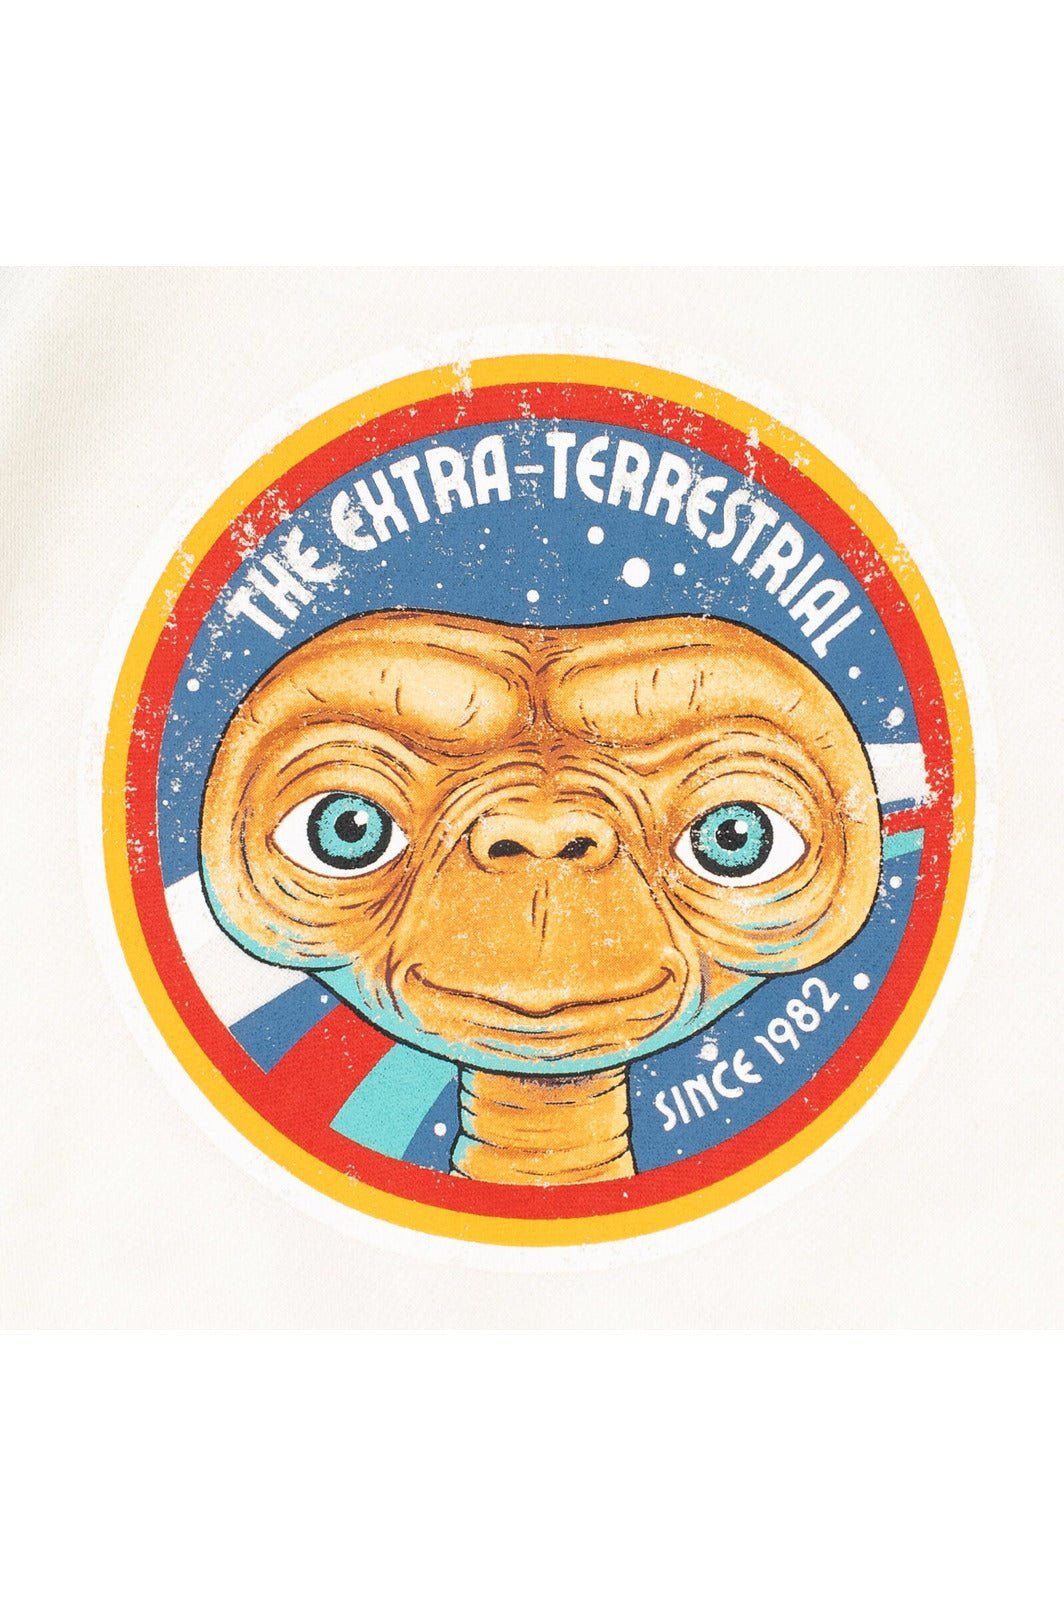 E.T. the Extra-Terrestrial Baby Boys Fleece Pullover Sweatshirt Infant to Toddler - imagikids